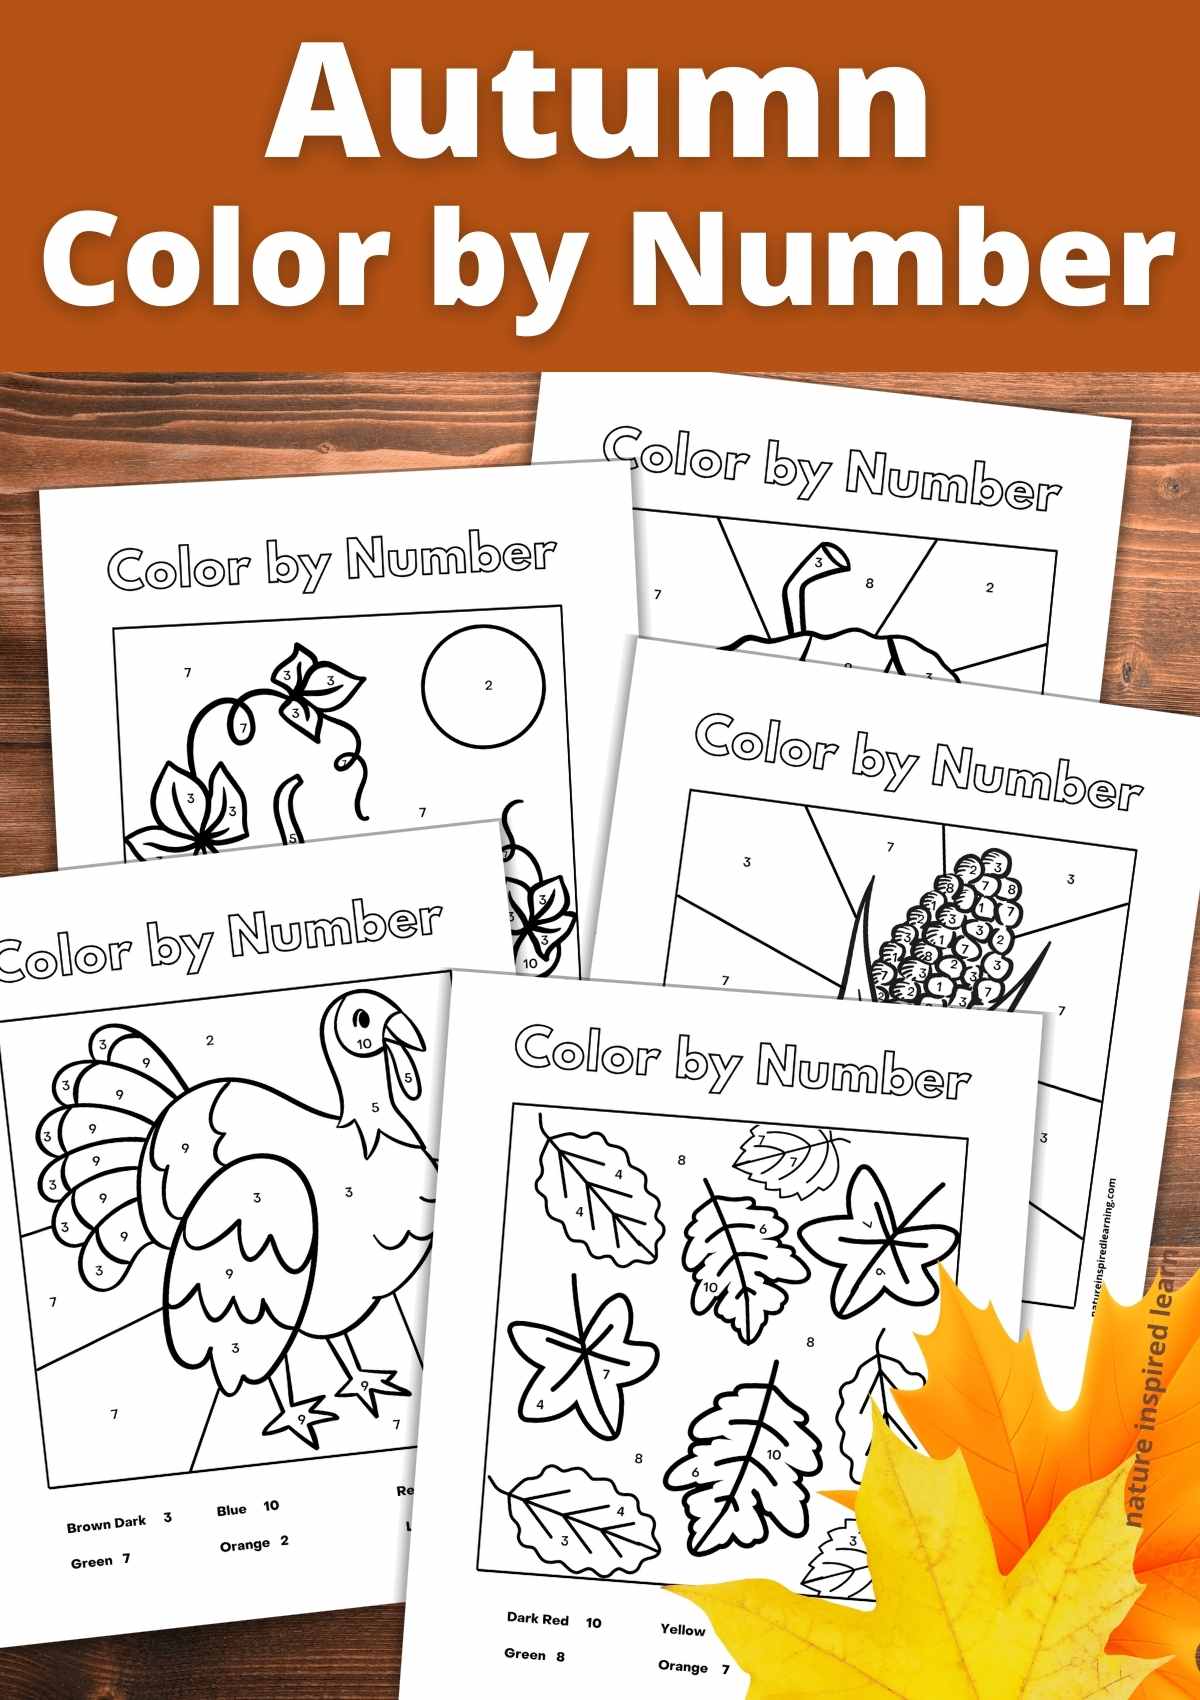 Five black and white fall color by number worksheets overlapping on a wooden background with a yellow and orange leaves bottom right with text overlay on orange background